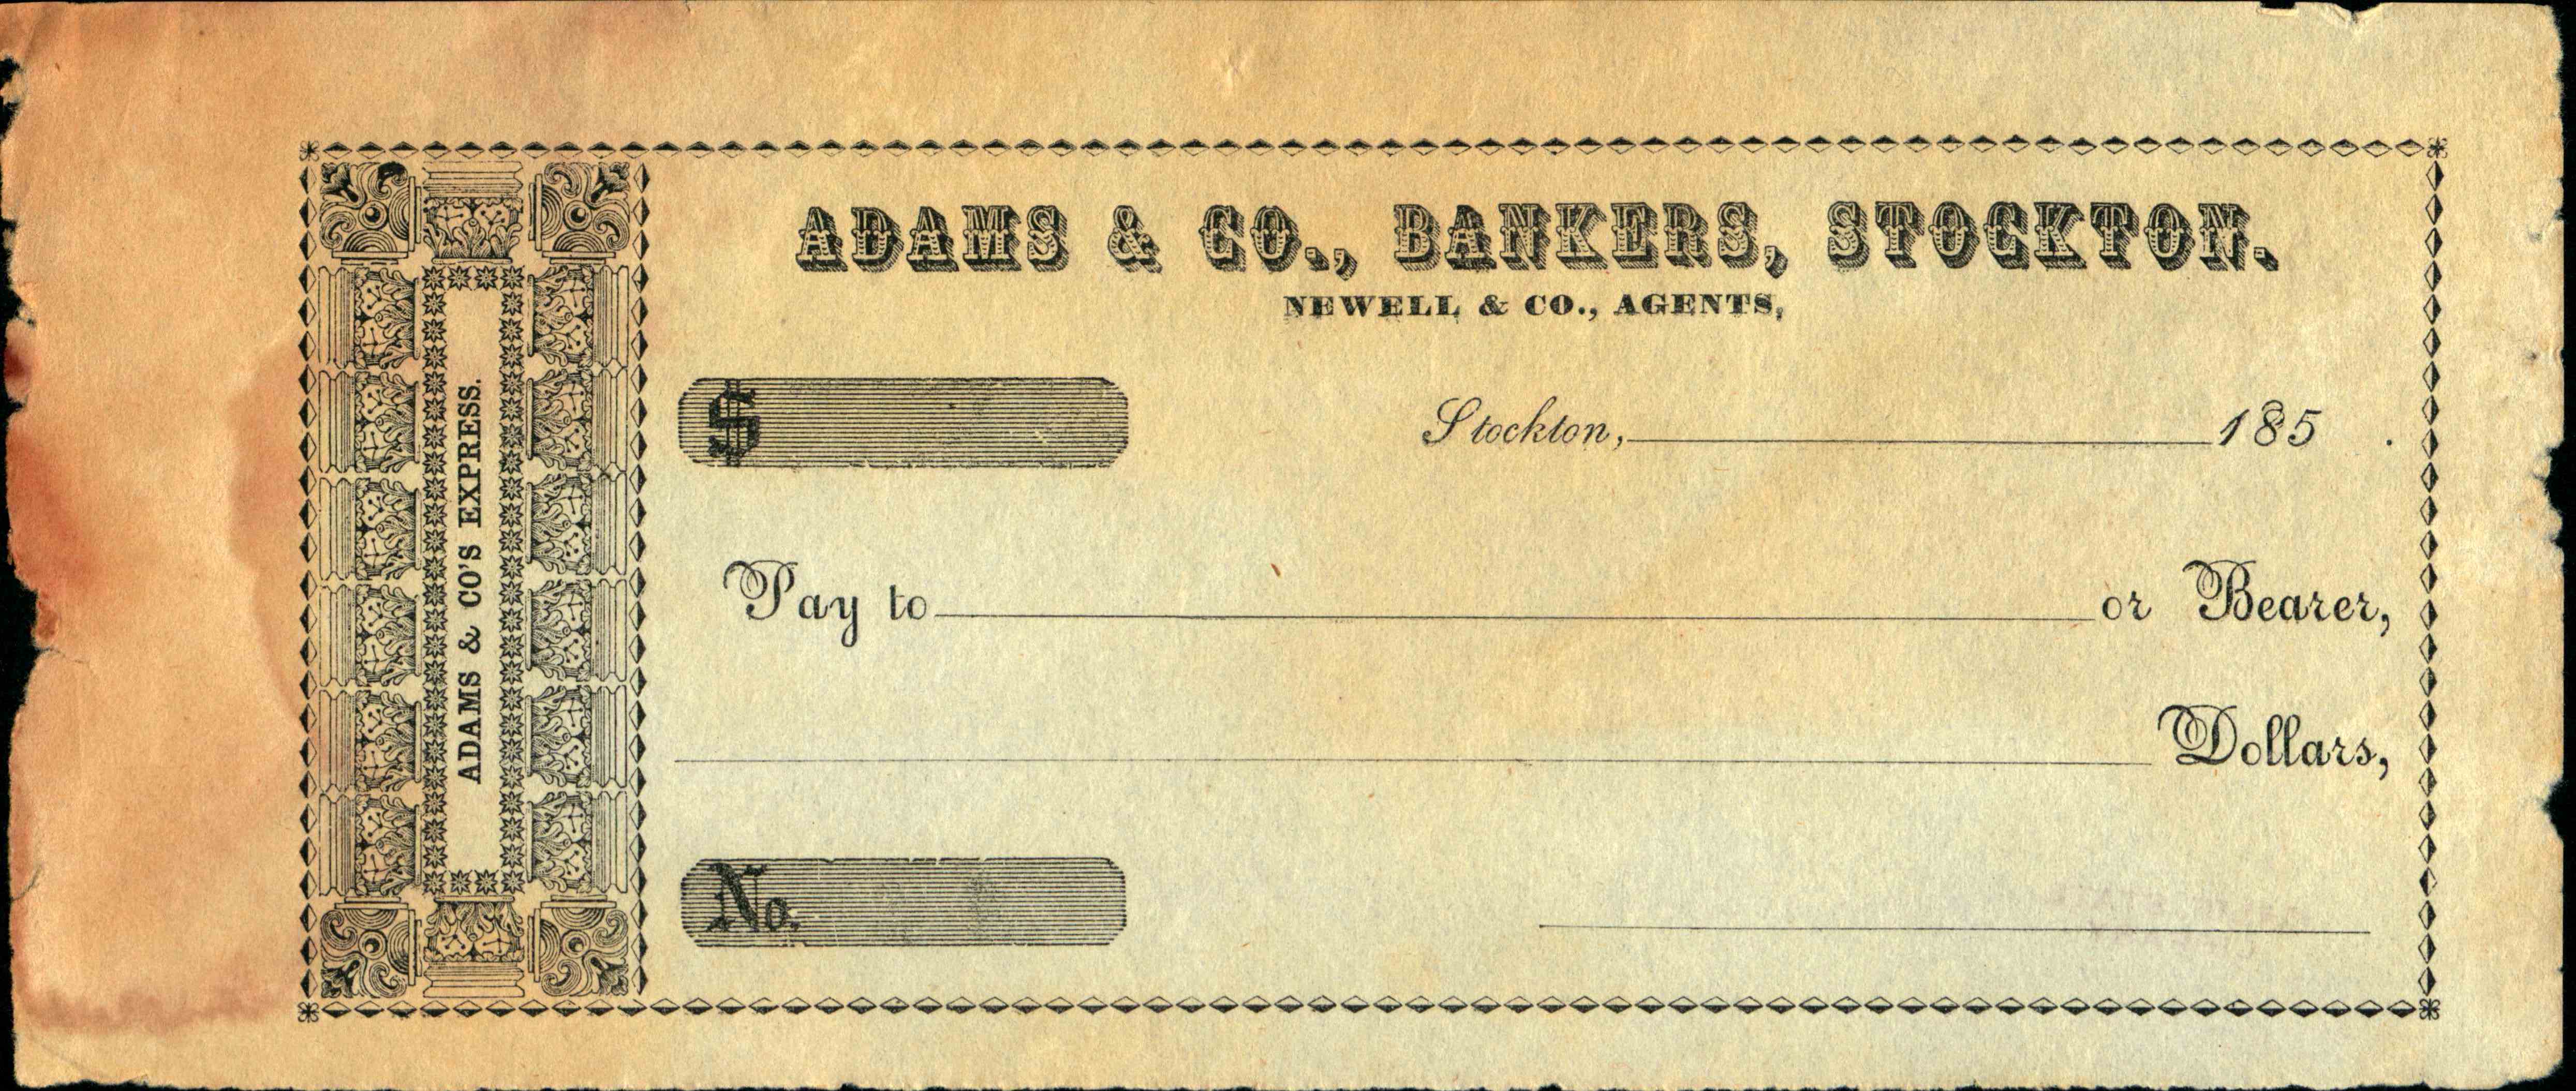 Design on left hand side with Adams & Co's Express logo